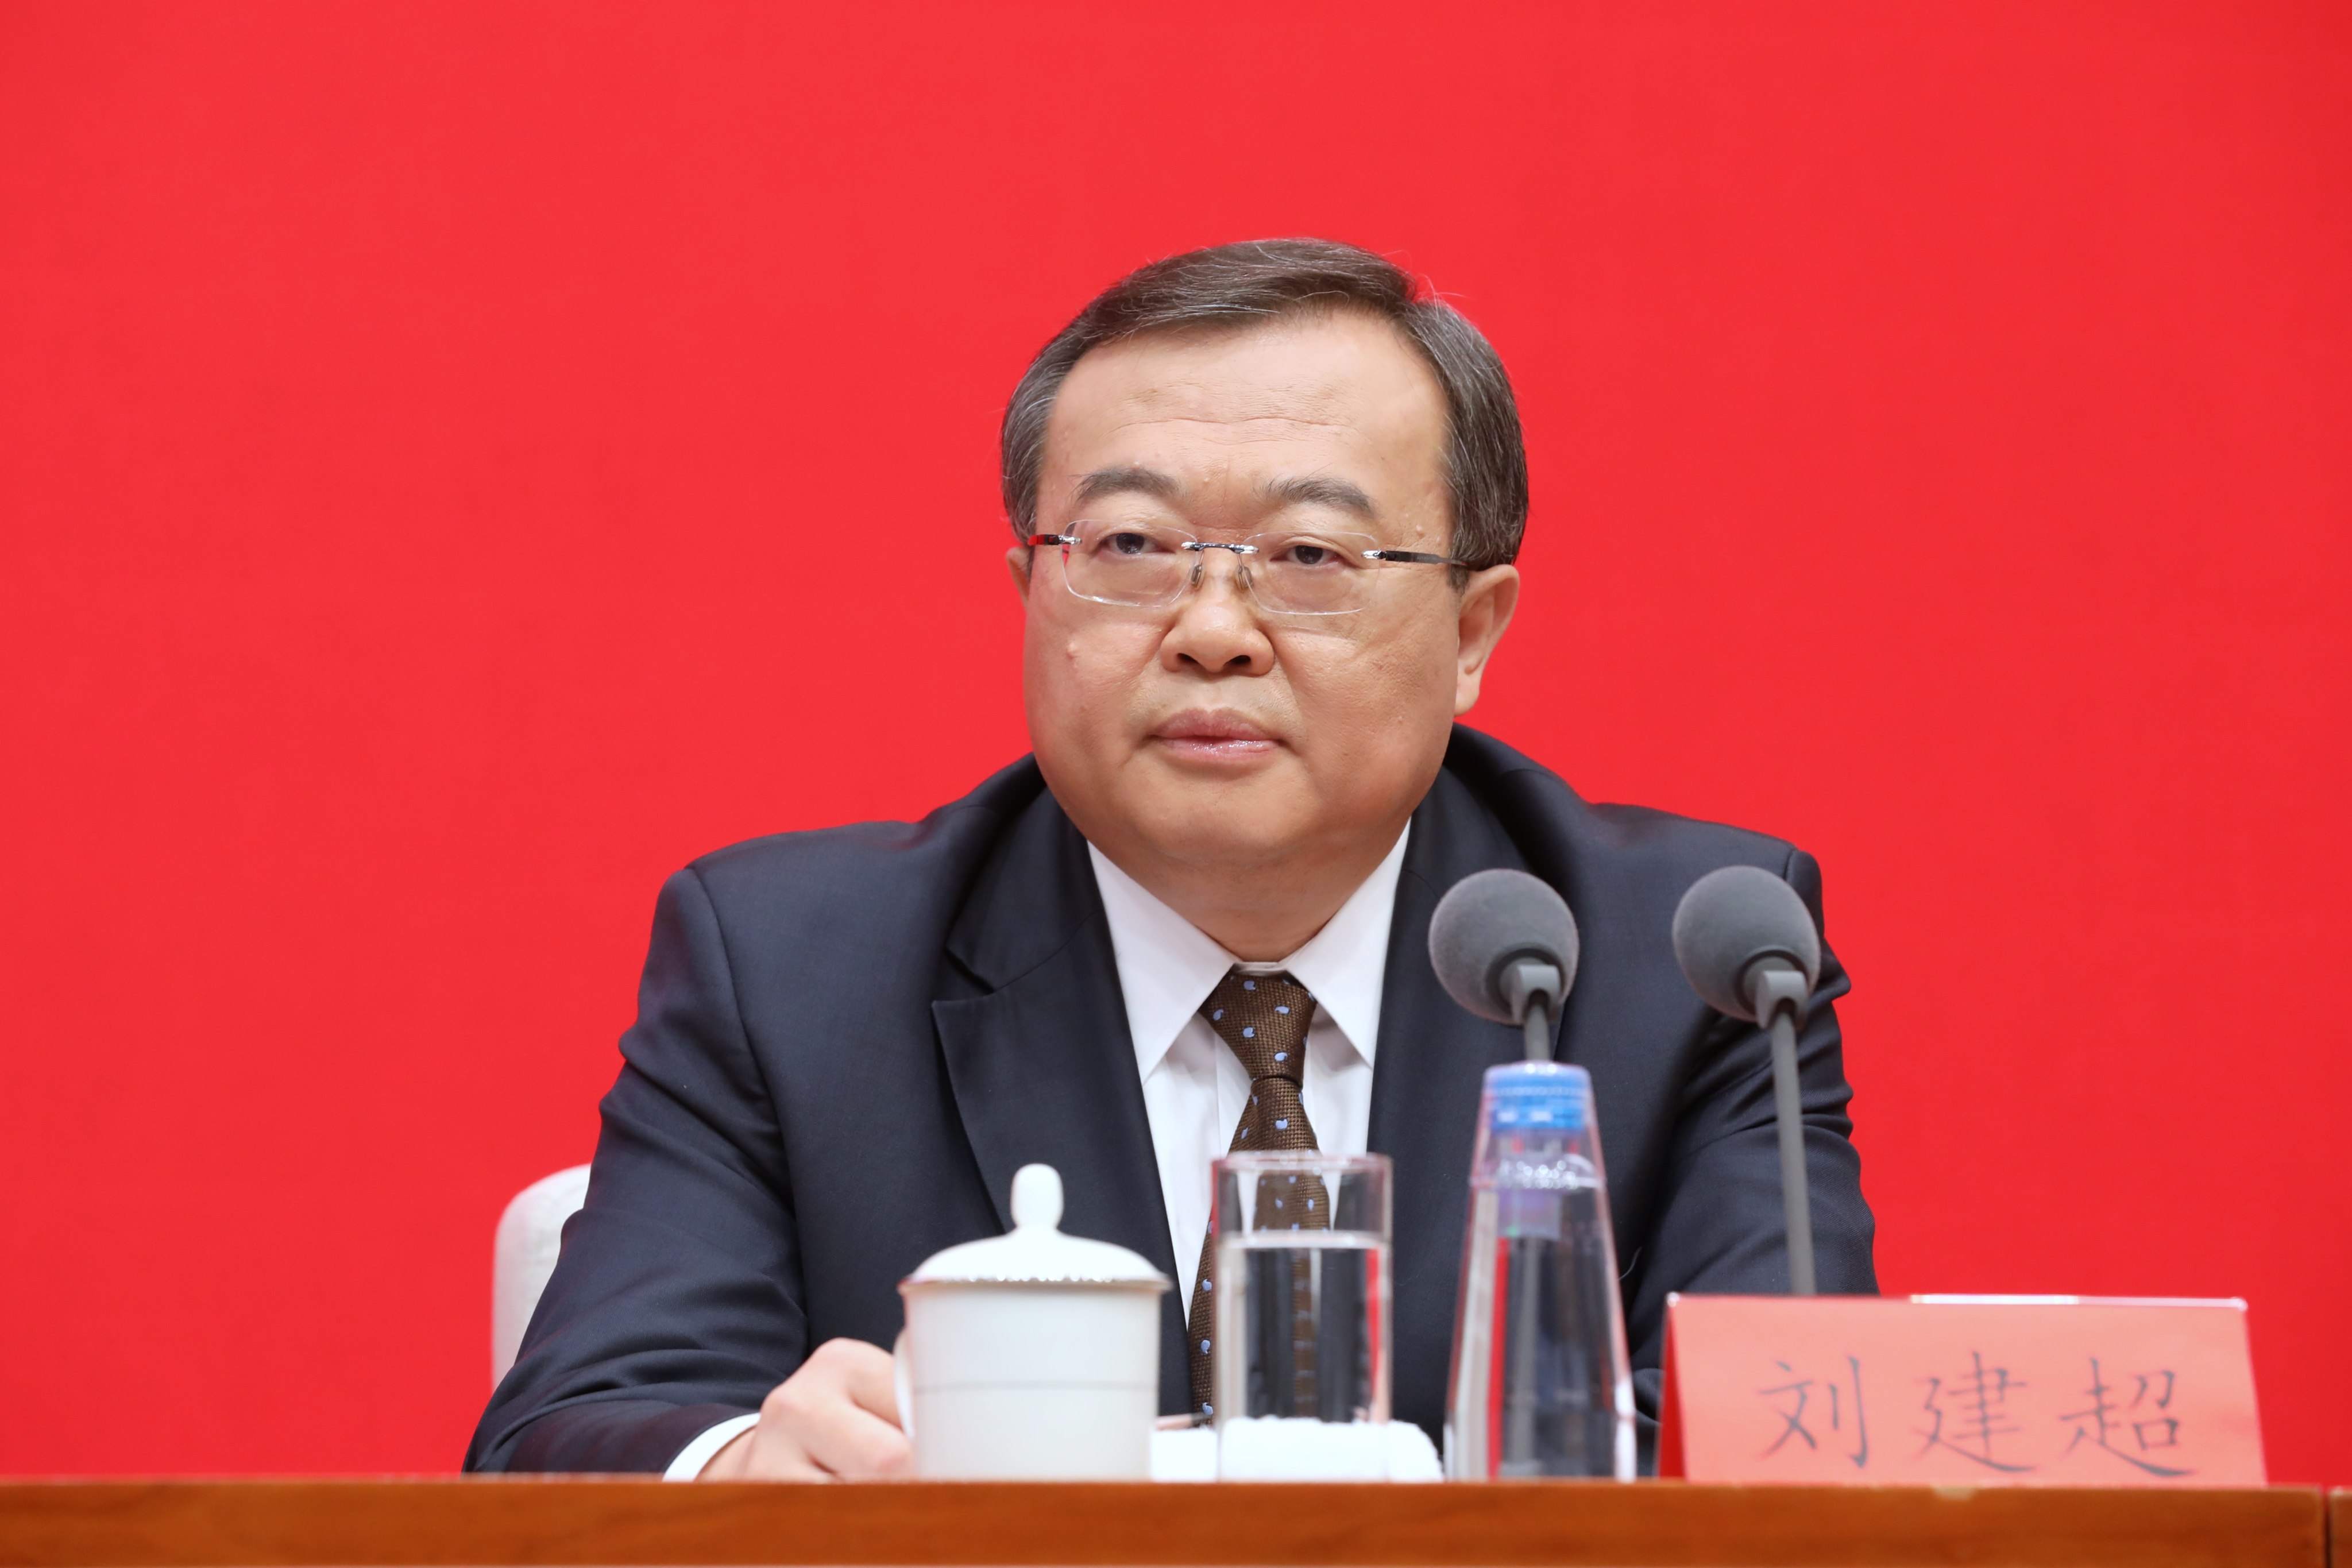 During a talk hosted by a US think tank, veteran Communist Party diplomat Liu Jianchao urged both sides to promote practical cooperation in various fields such as economy and trade, to achieve visible results and to improve public confidence in China-US relations. Photo: Getty Images